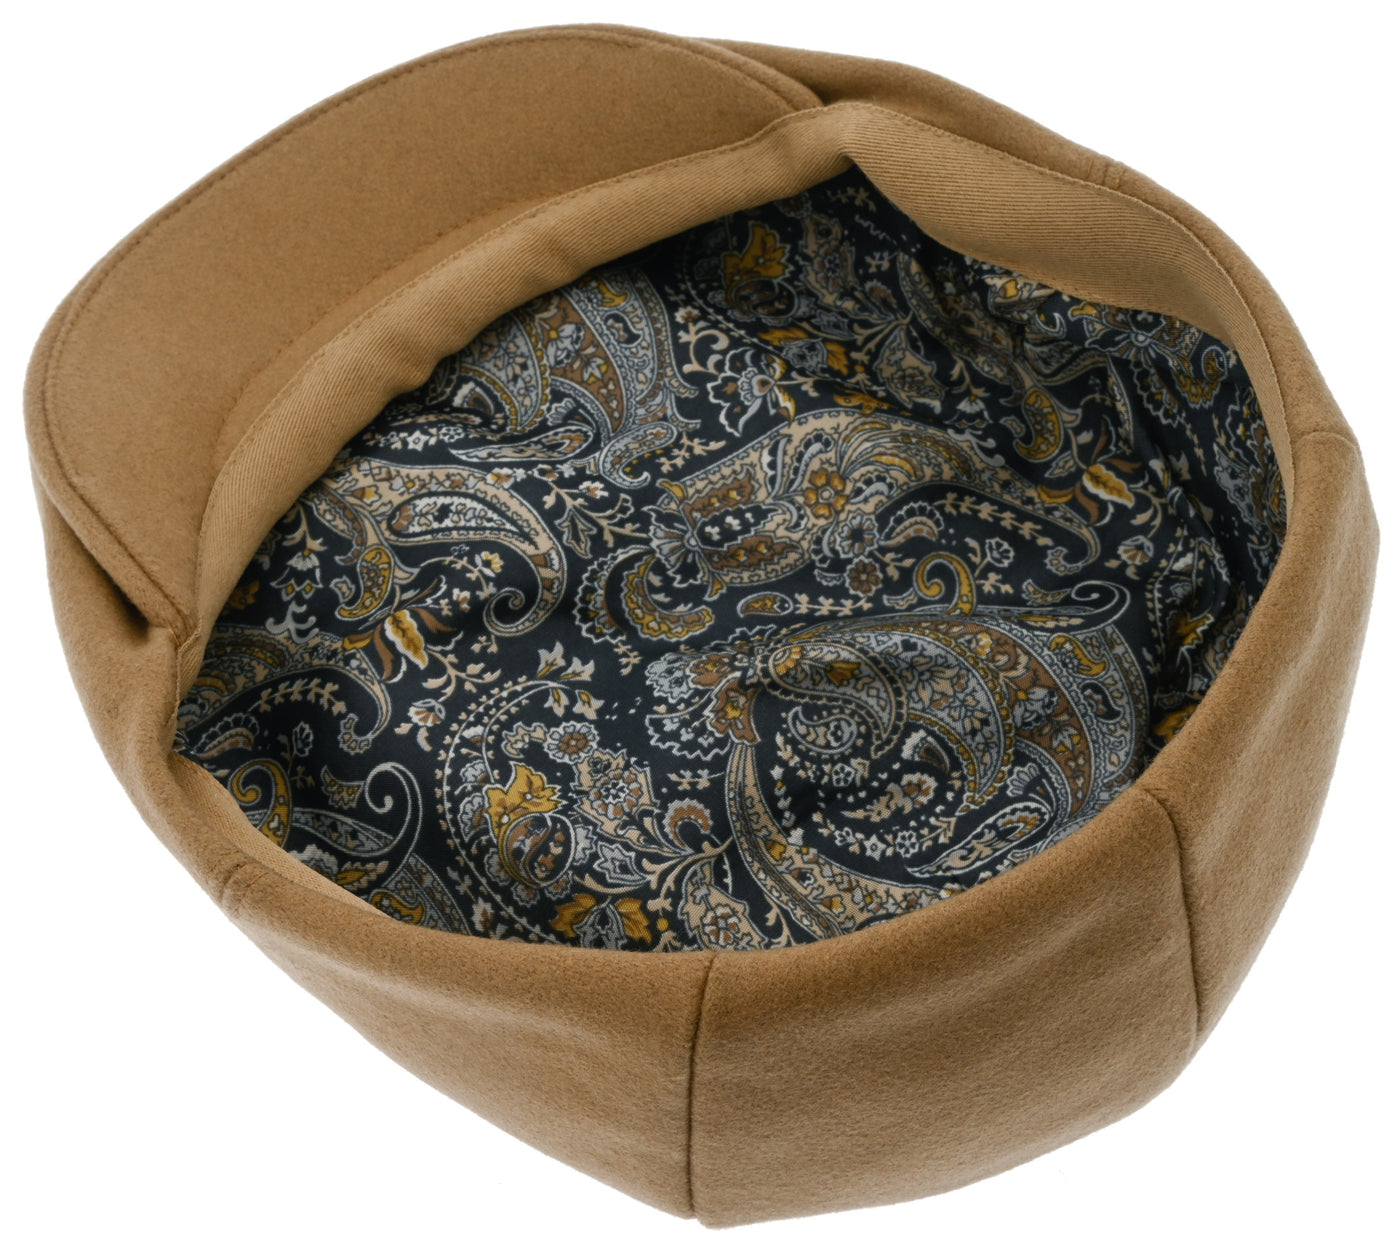 Flat Cap with a paisly pattren lining.